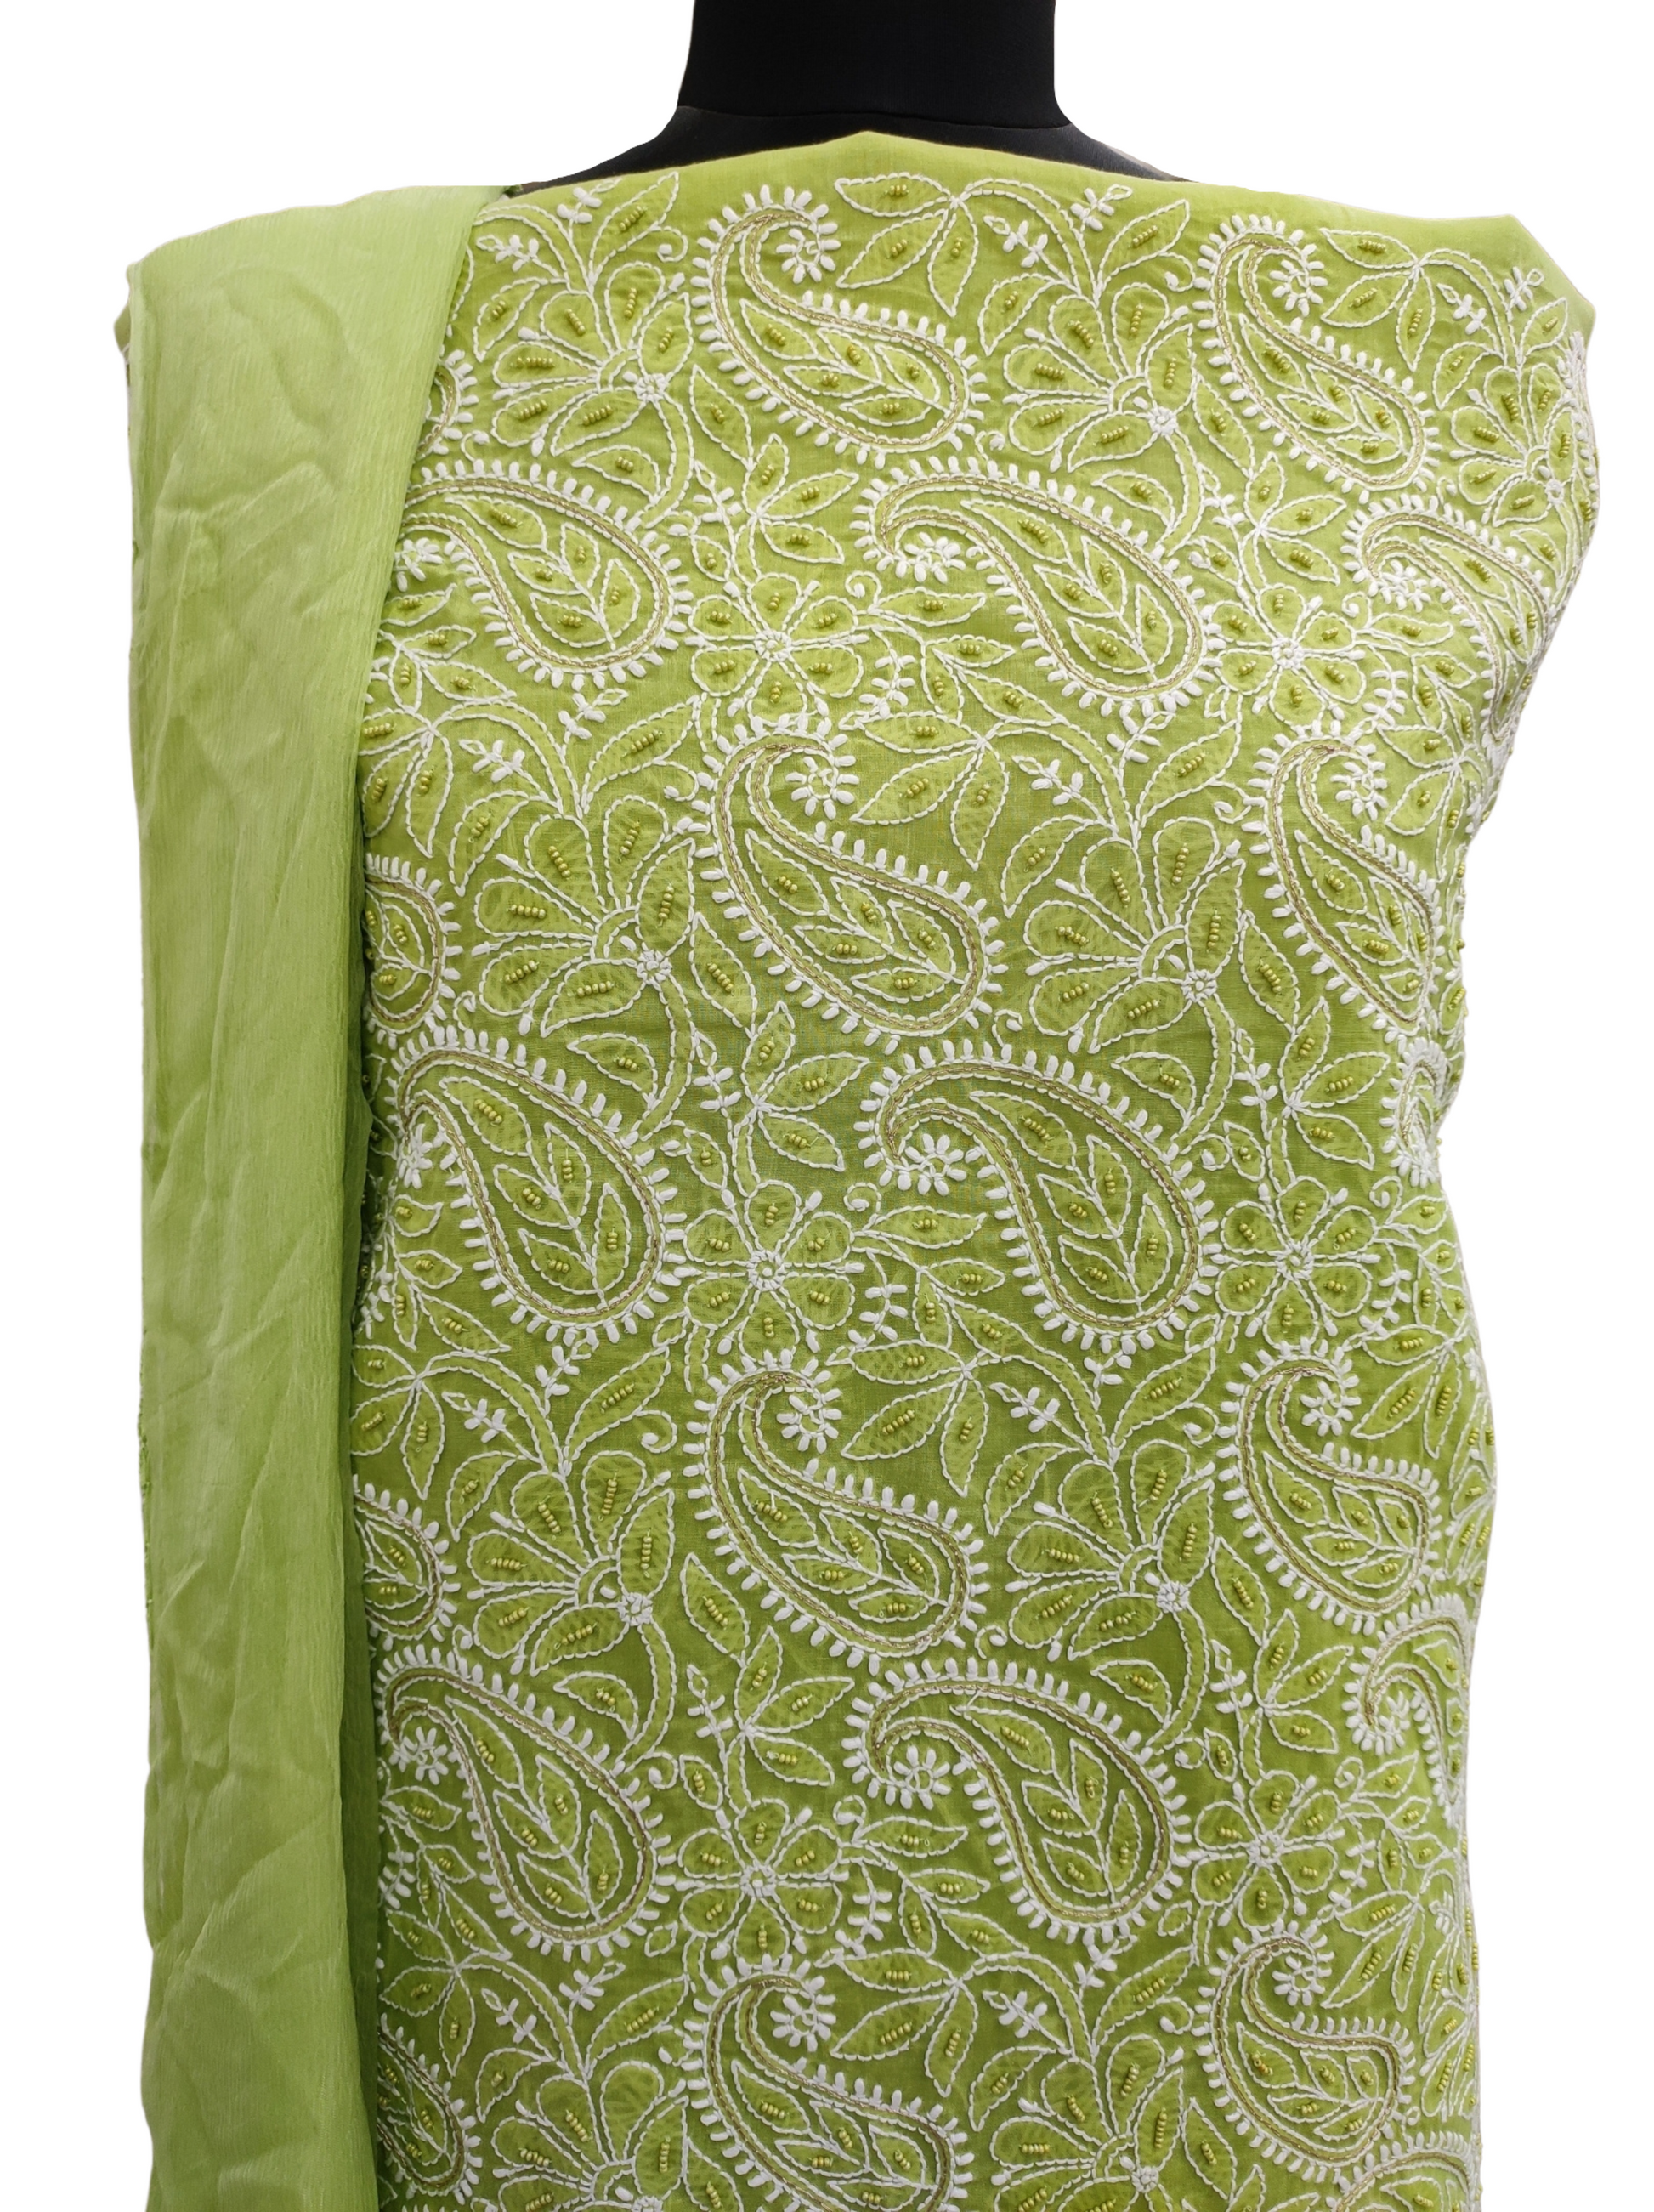 Shyamal Chikan Hand Embroidered Green Cotton Lucknowi Chikankari Unstitched Suit Piece With Pearl Work - S10037 - Shyamal Chikan